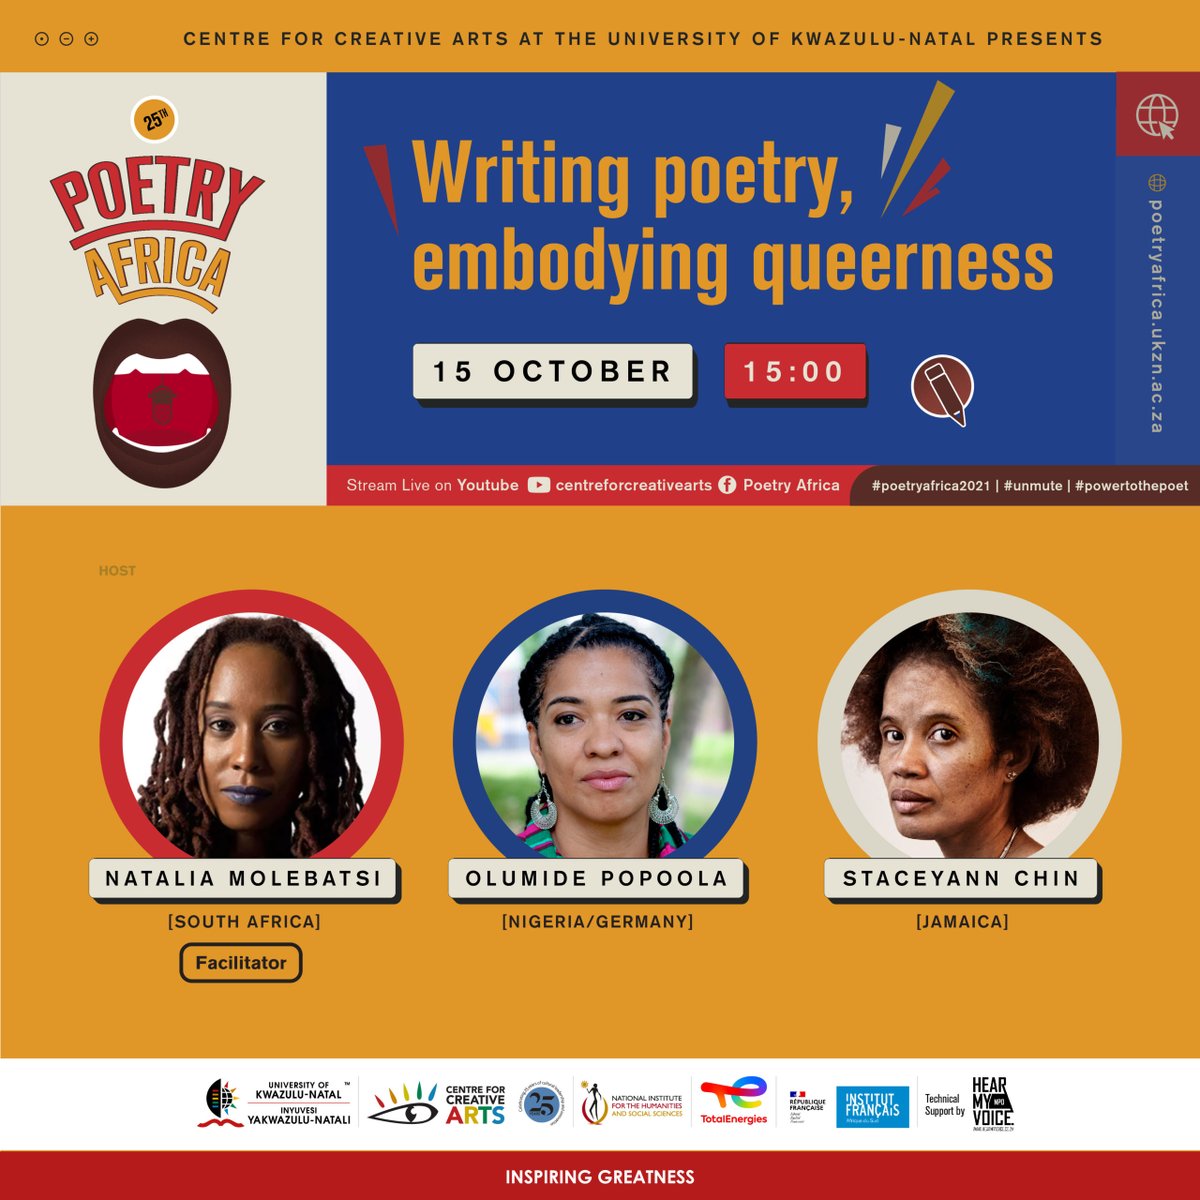 There are some amazing poetry shows coming our way.

Get the full @PoetryAfrica programme here: bit.ly/3lwX7YF
#PowerToThePoet